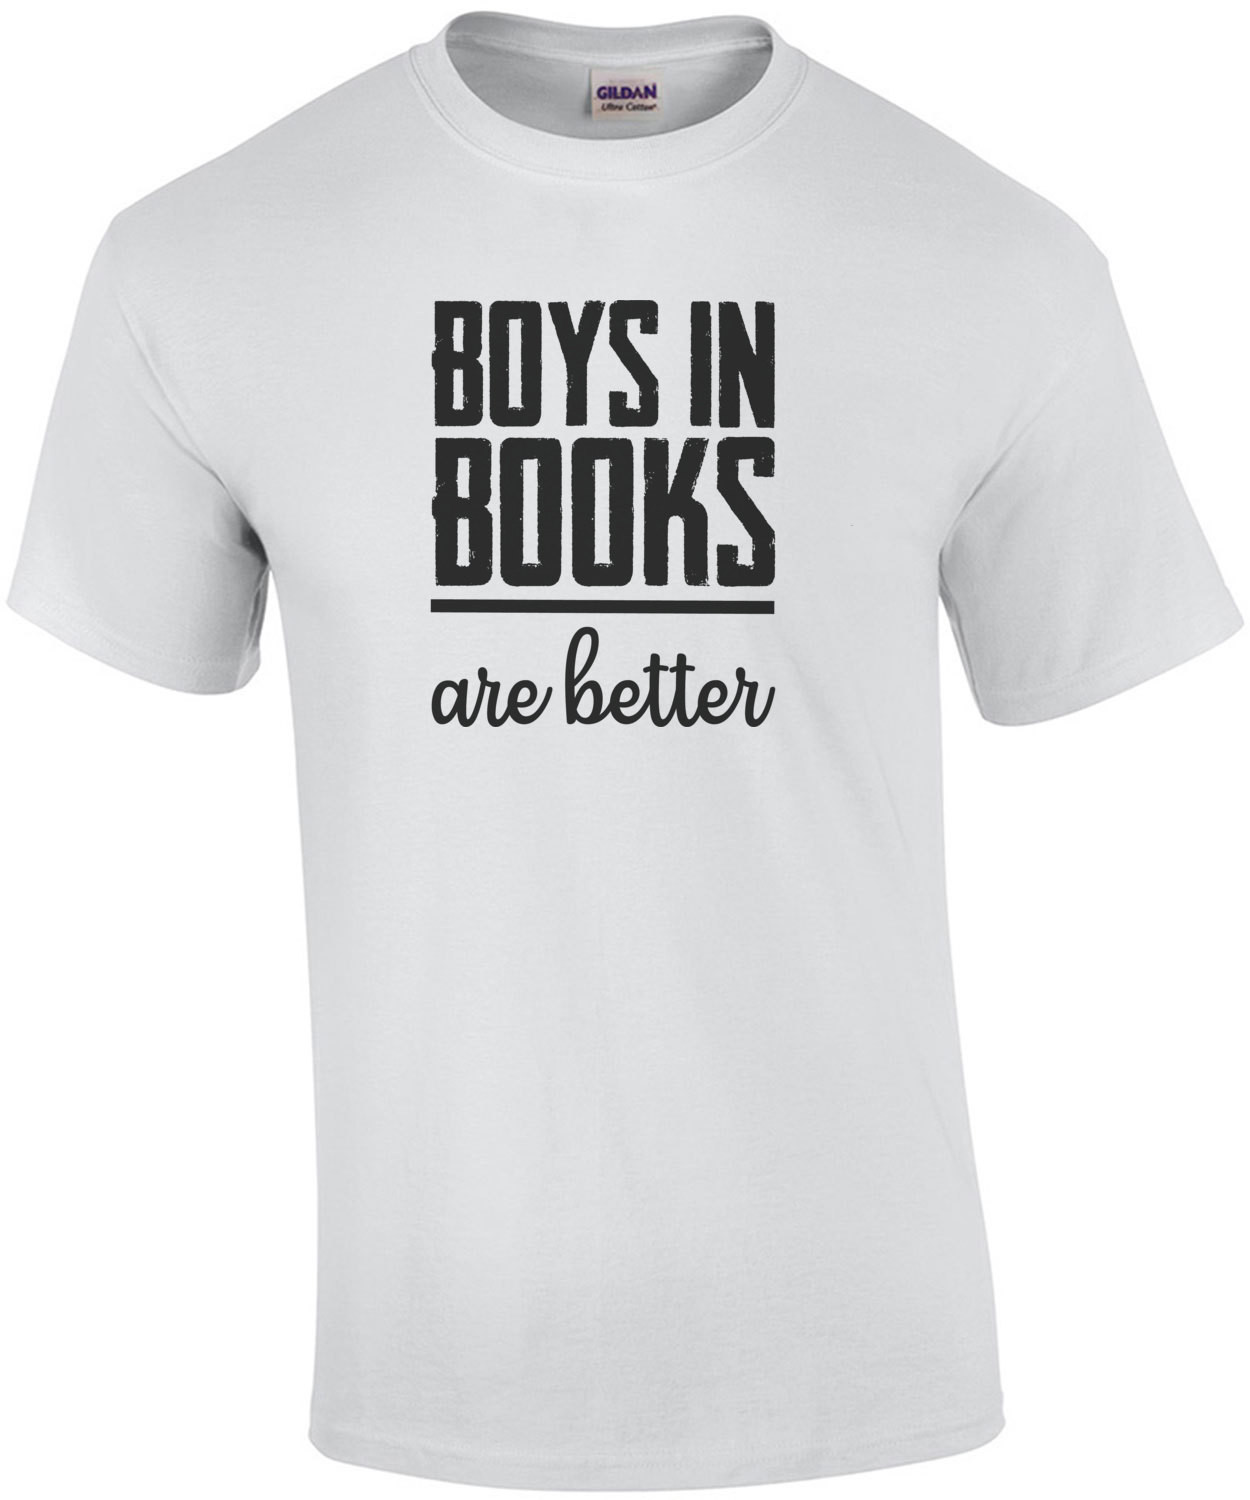 boys in books are better - funny t-shirt